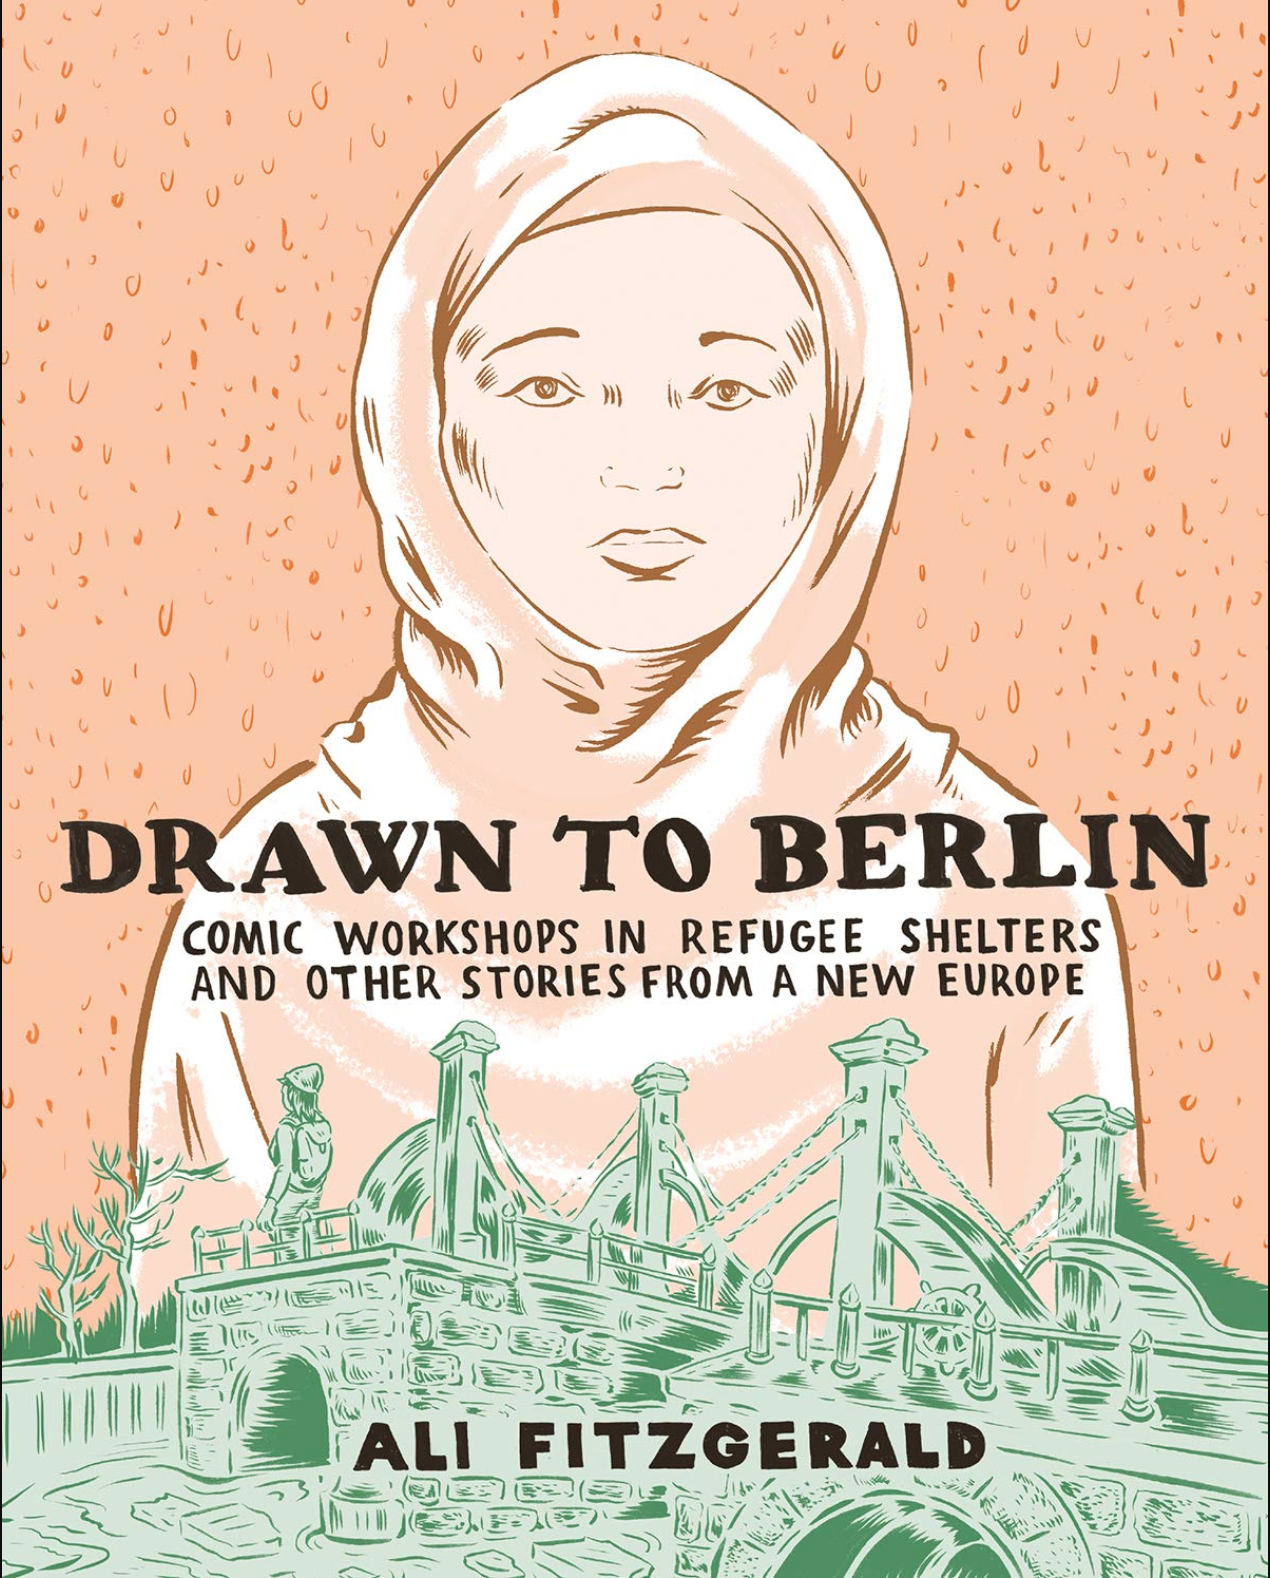 Drawn To Berlin: Comic Workshops In Refugee Shelters And Other Stories From A New Europe - Hardcover